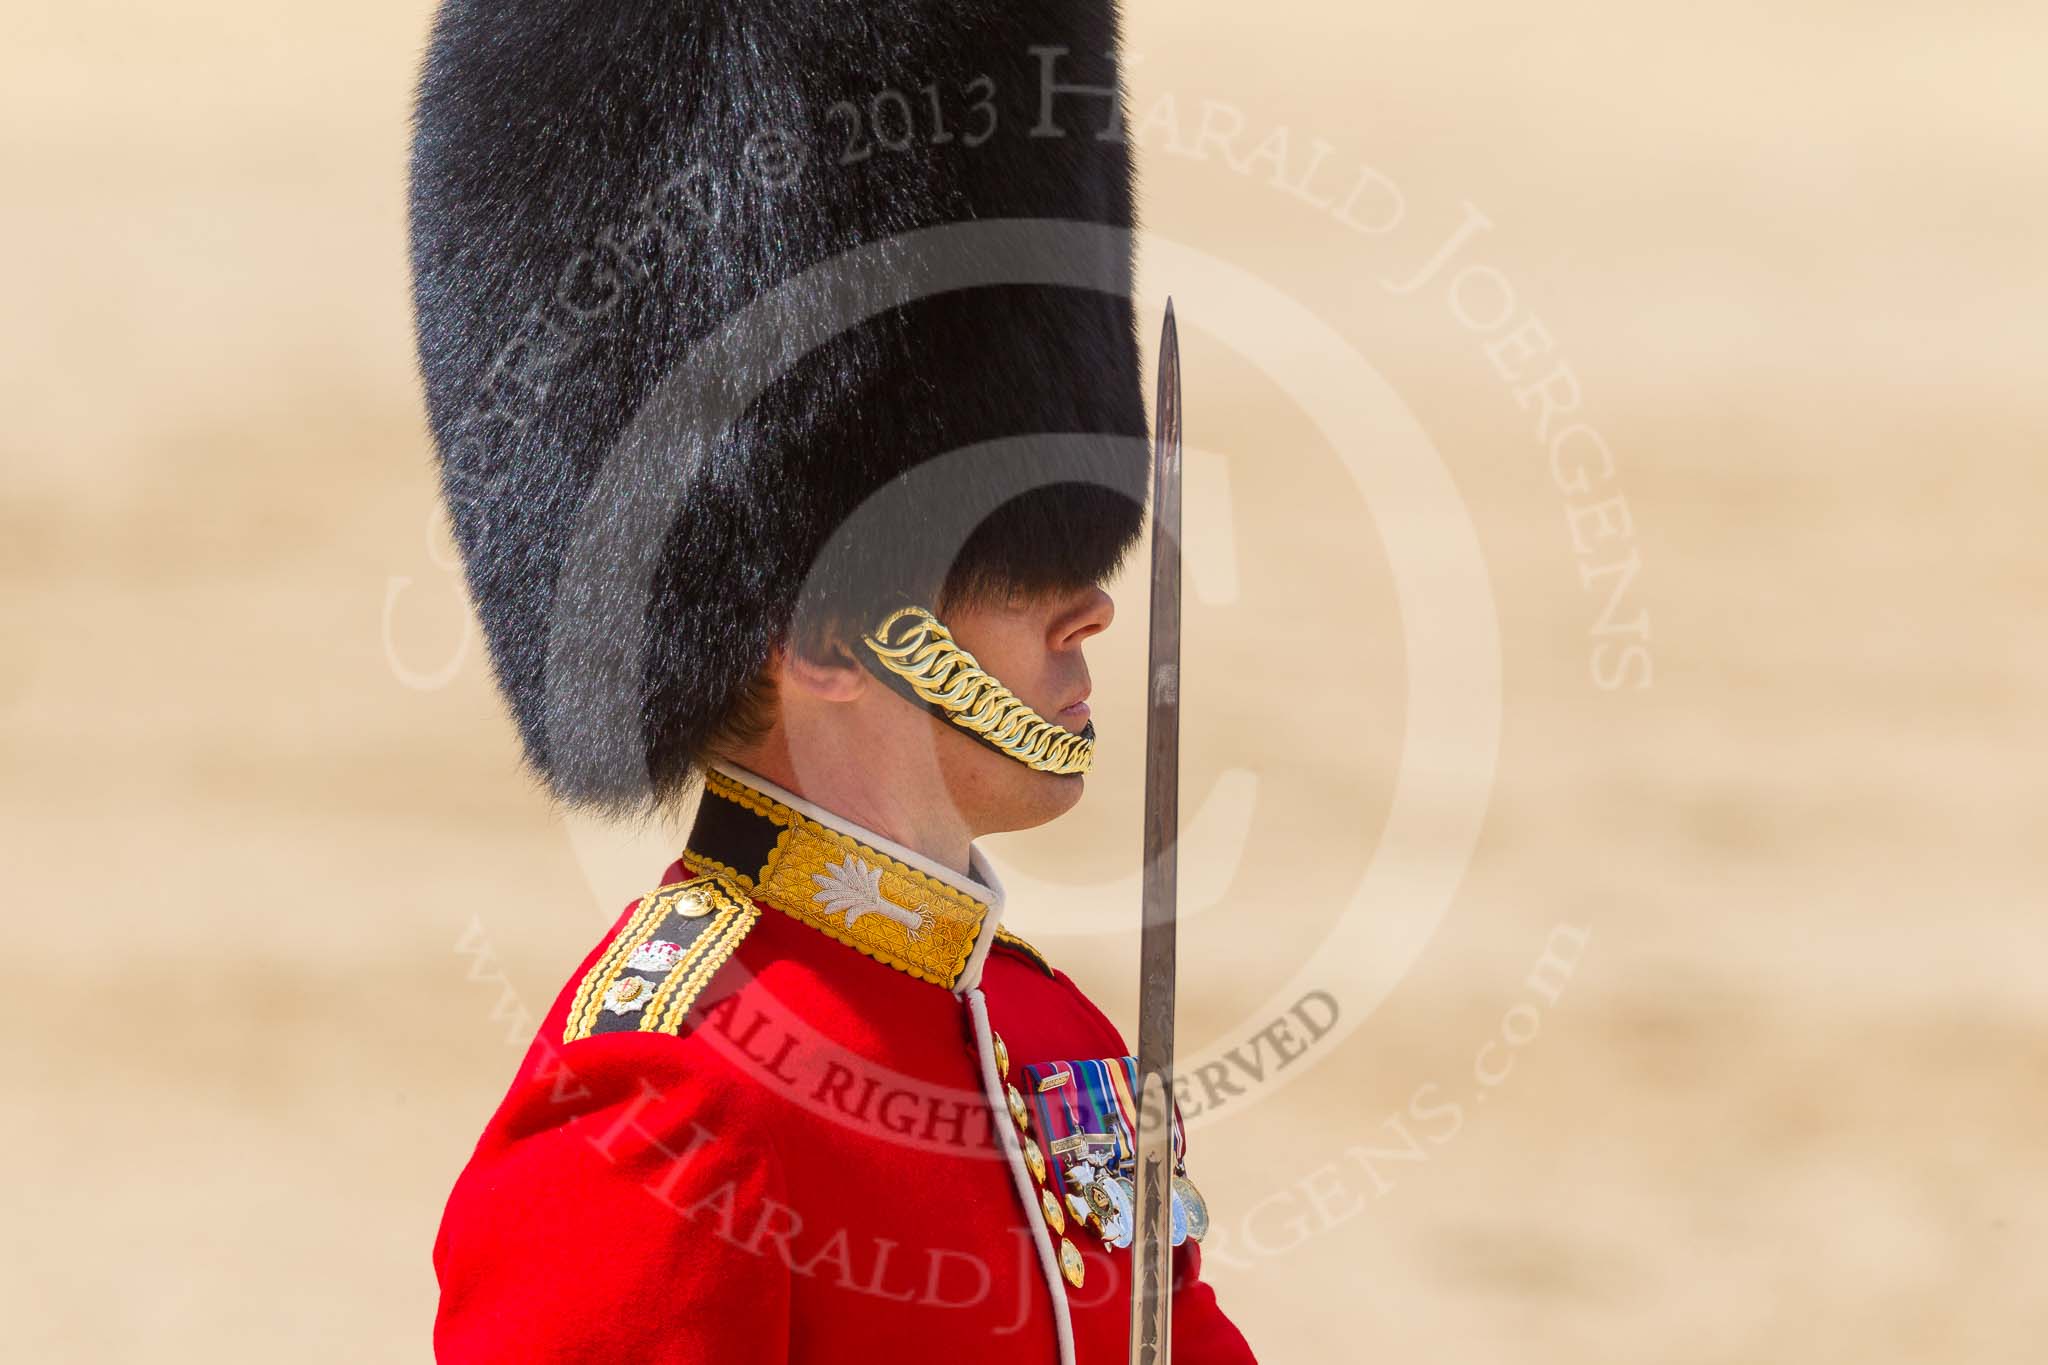 The Colonel's Review 2015.
Horse Guards Parade, Westminster,
London,

United Kingdom,
on 06 June 2015 at 11:32, image #366